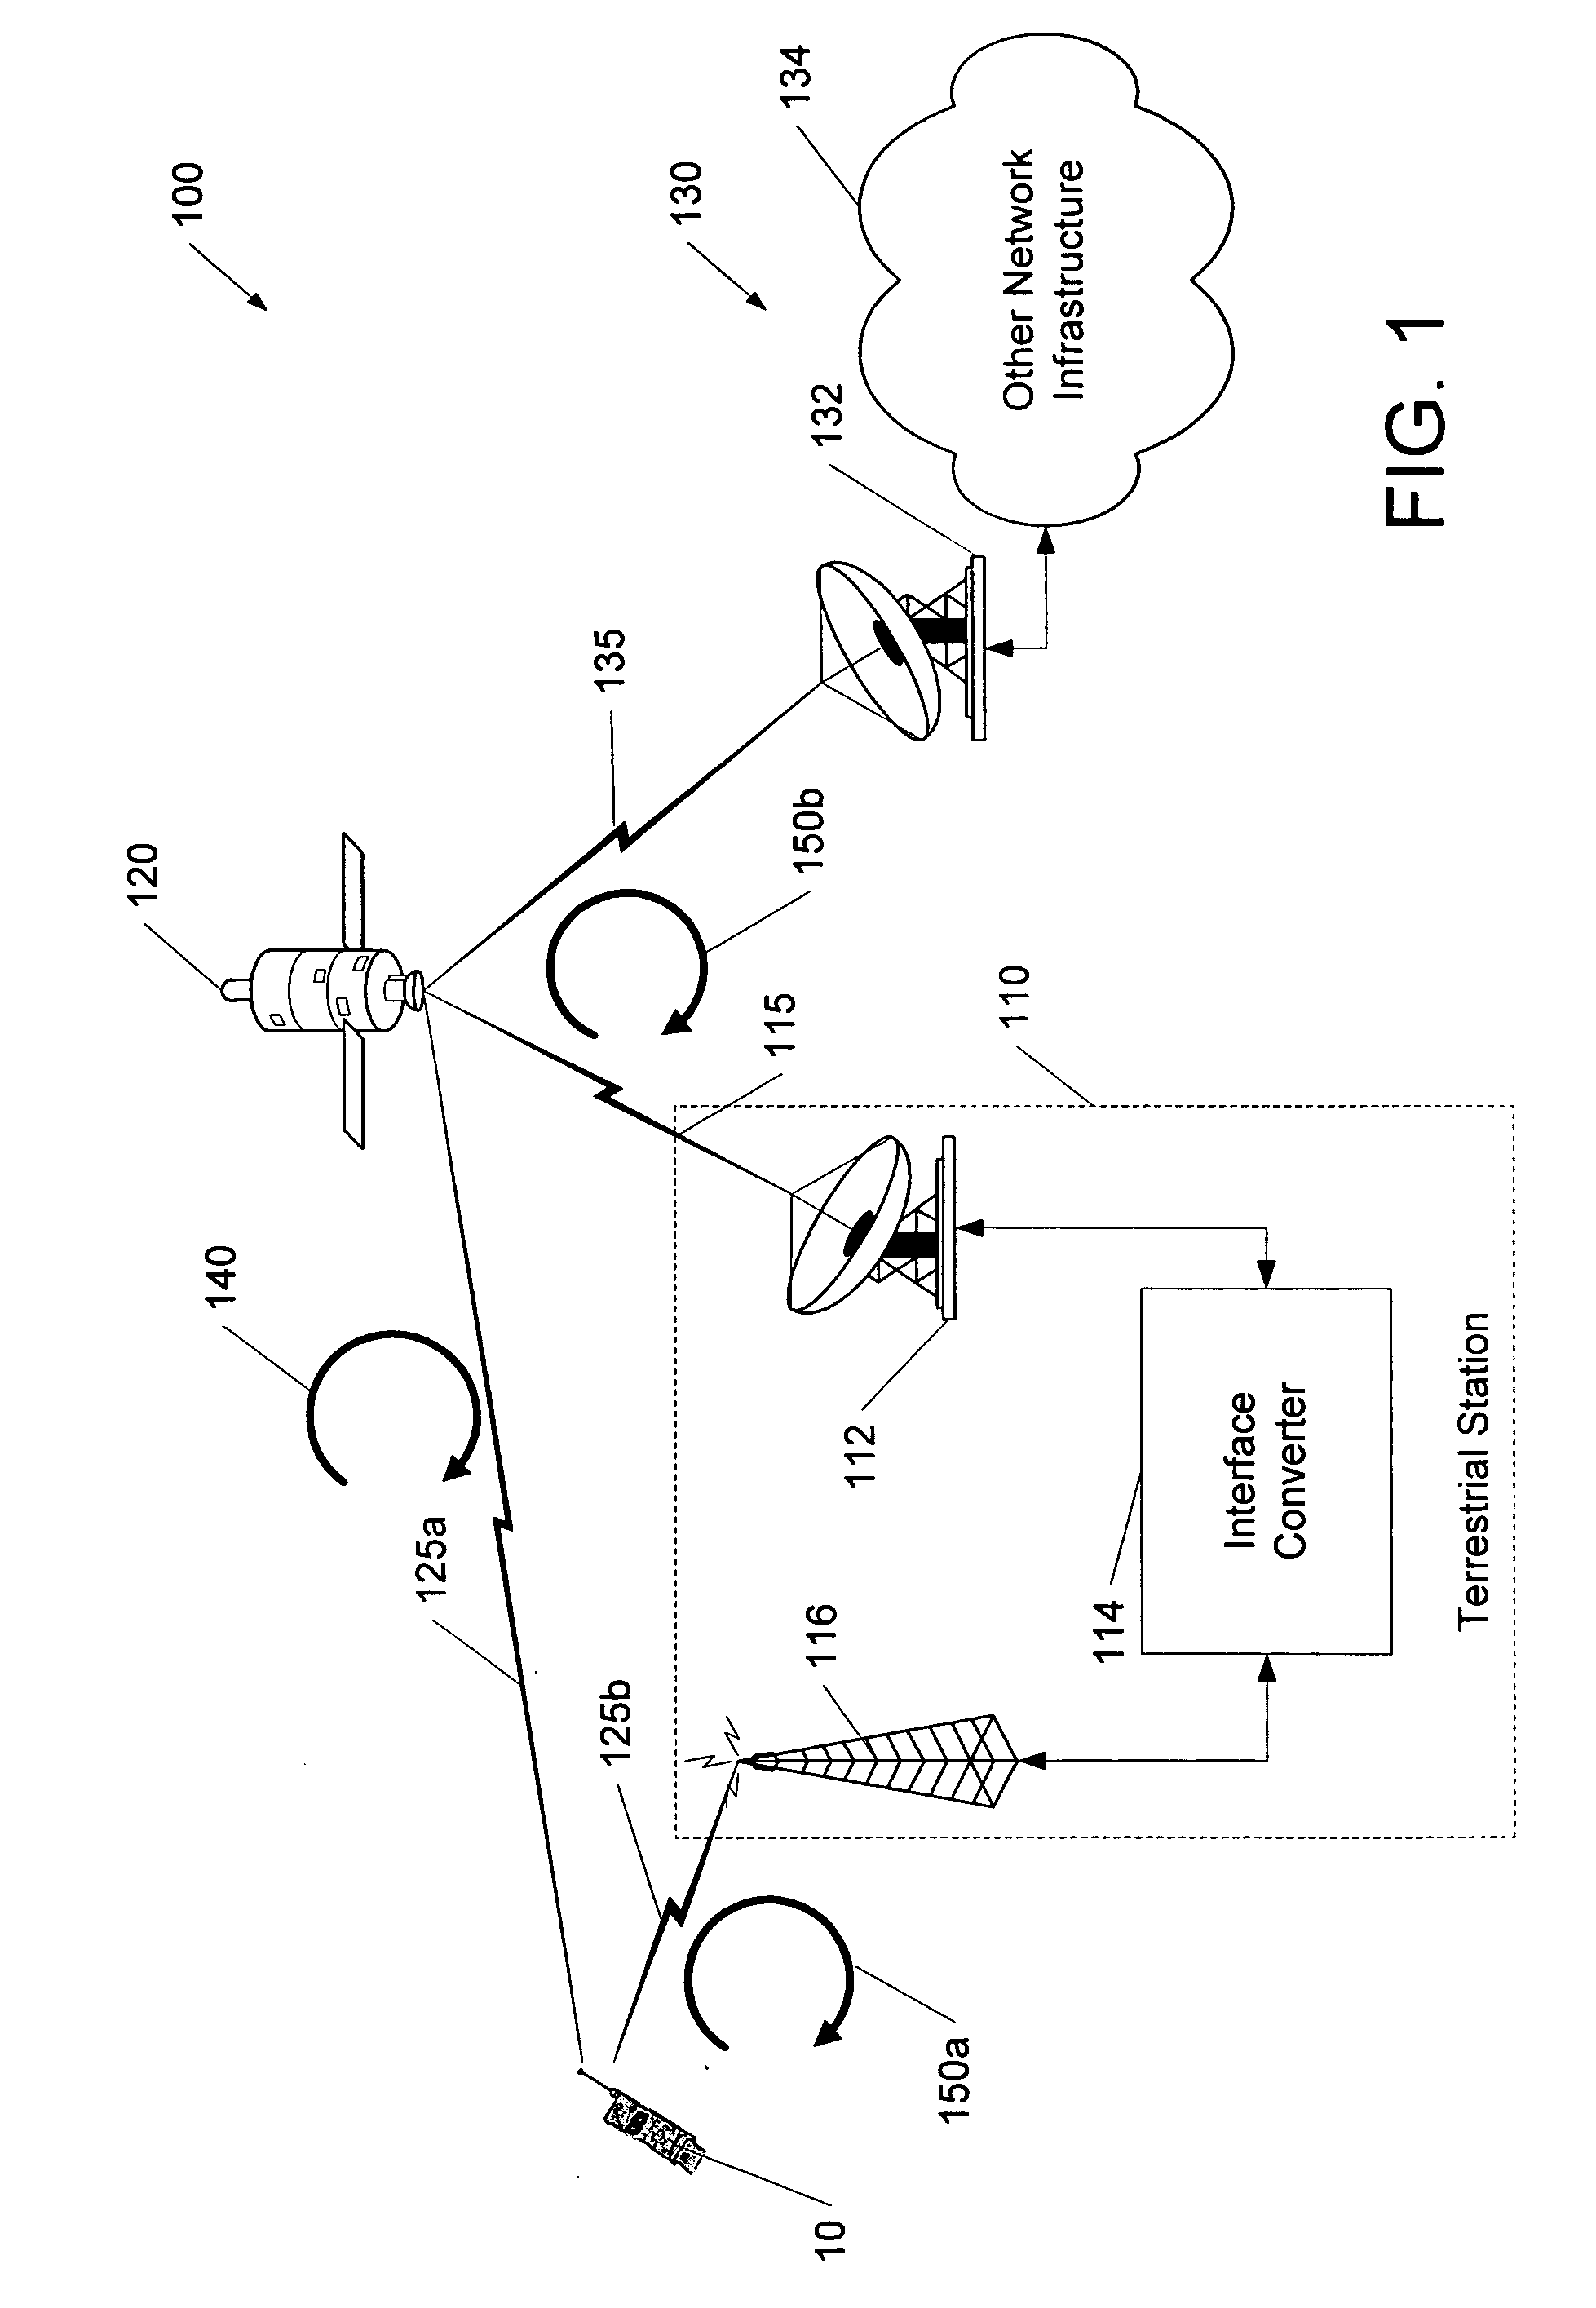 Apparatus and methods for power control in satellite communications systems with satellite-linked terrestrial stations